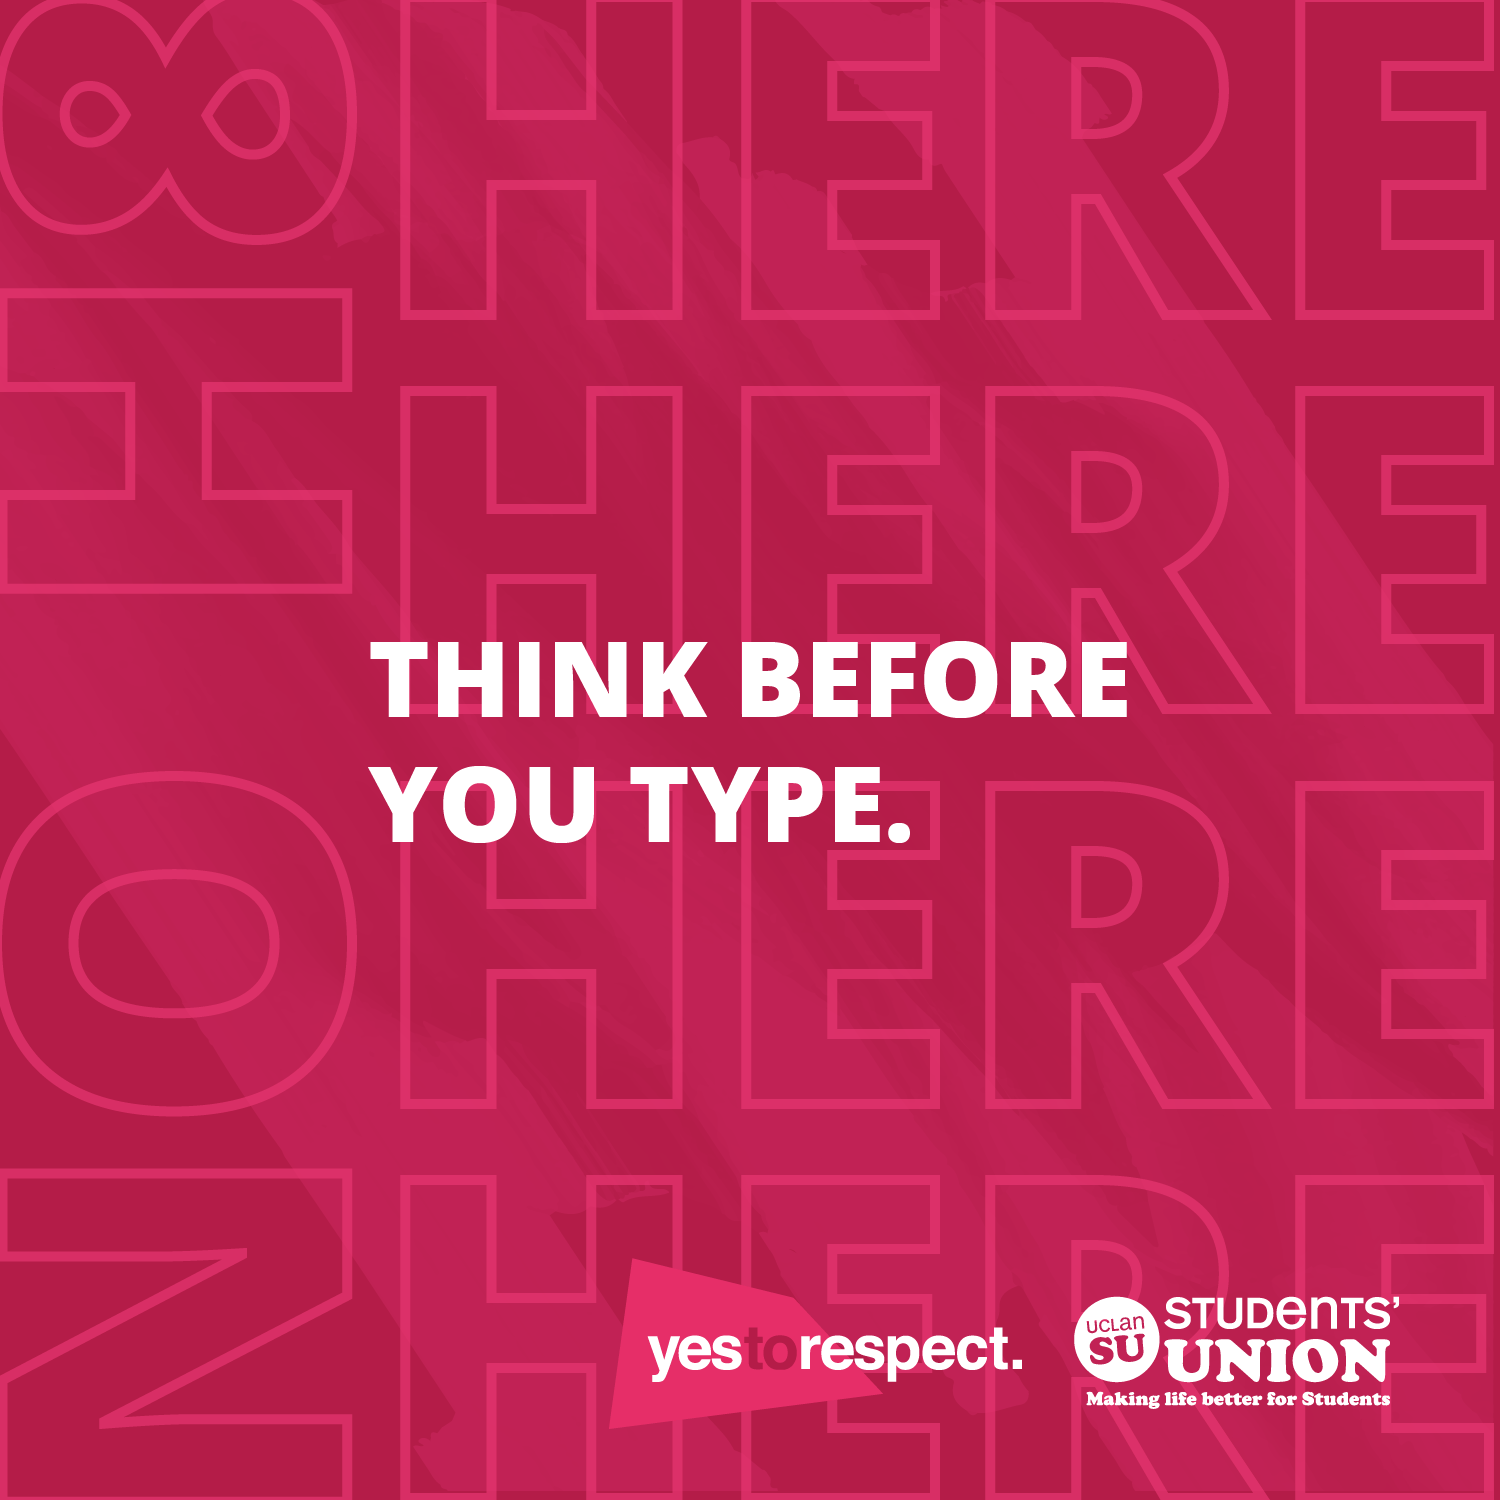 University of Central Lancashire - think before you type